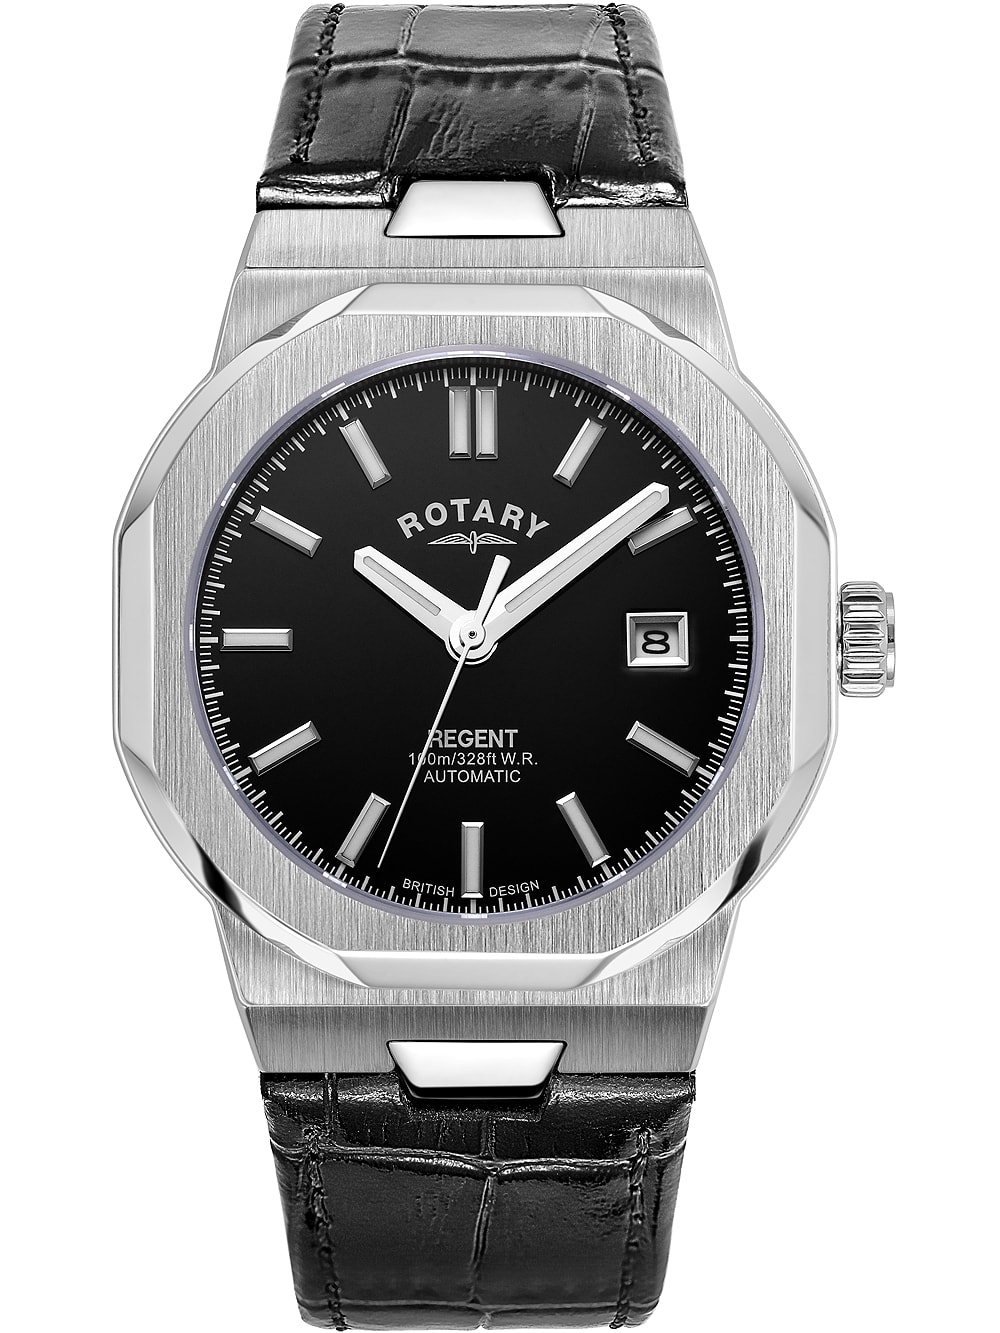 Gs05410/04, Automatic, 40mm, 10atm, silver